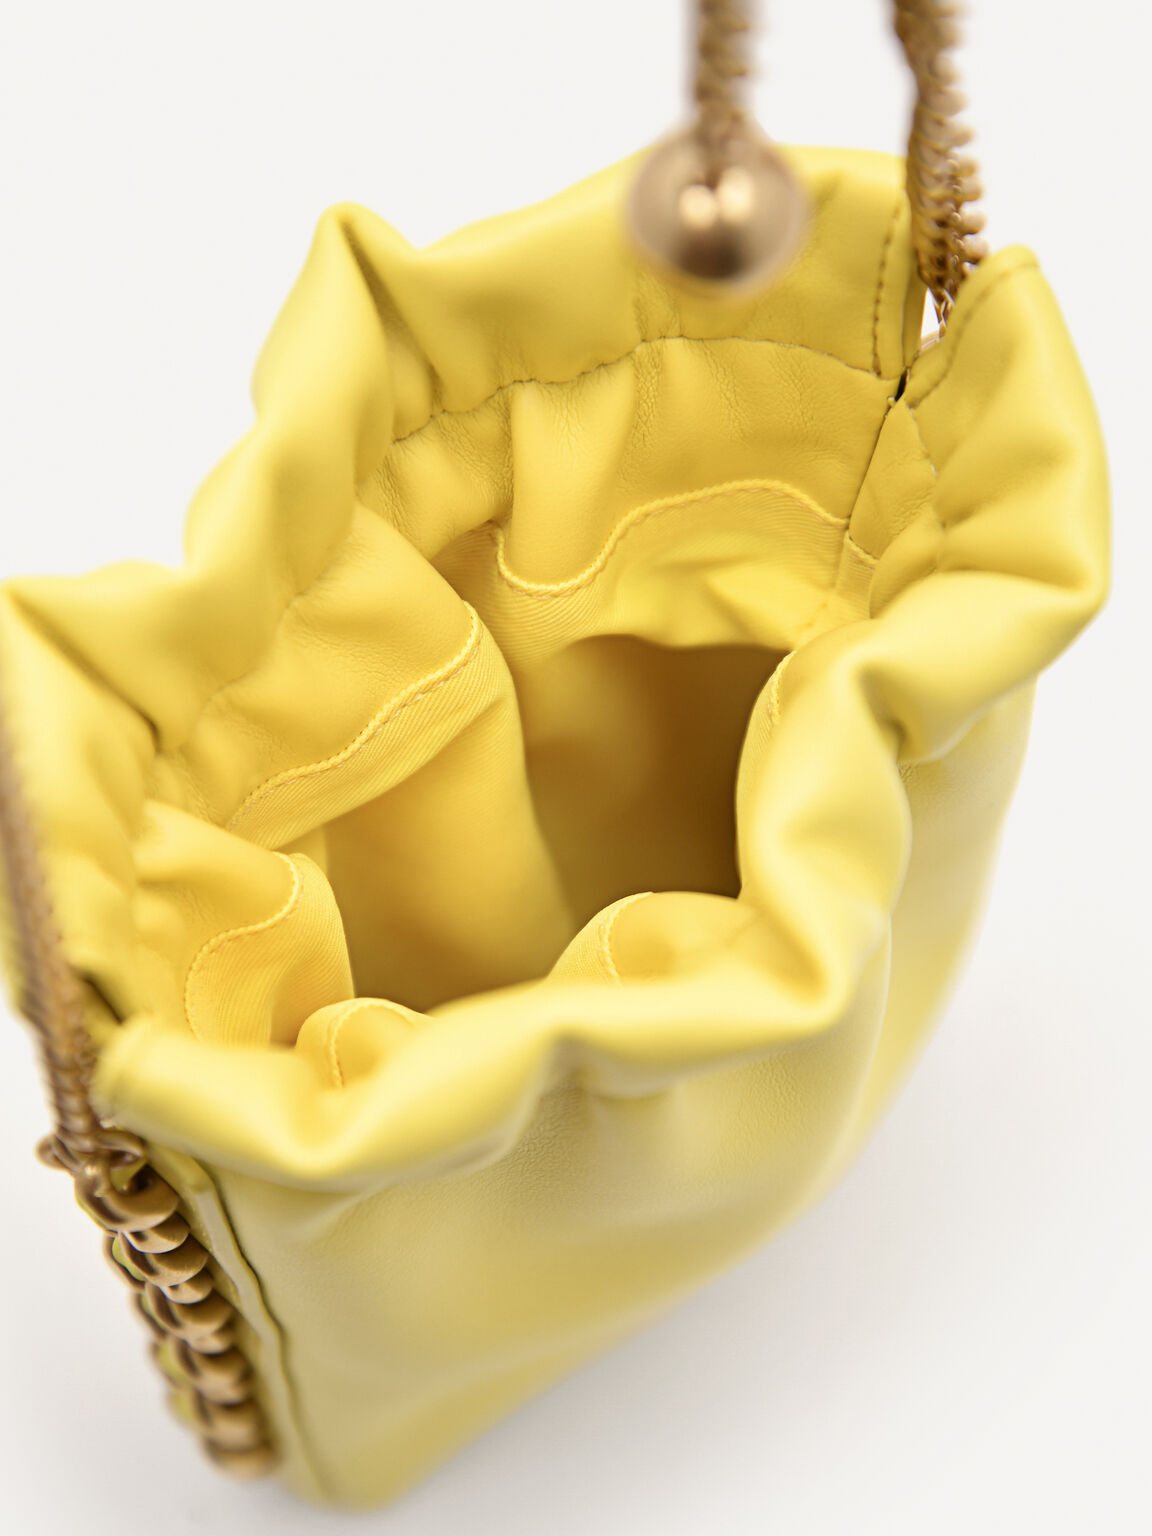 Chain Sling Pouch, Yellow, hi-res